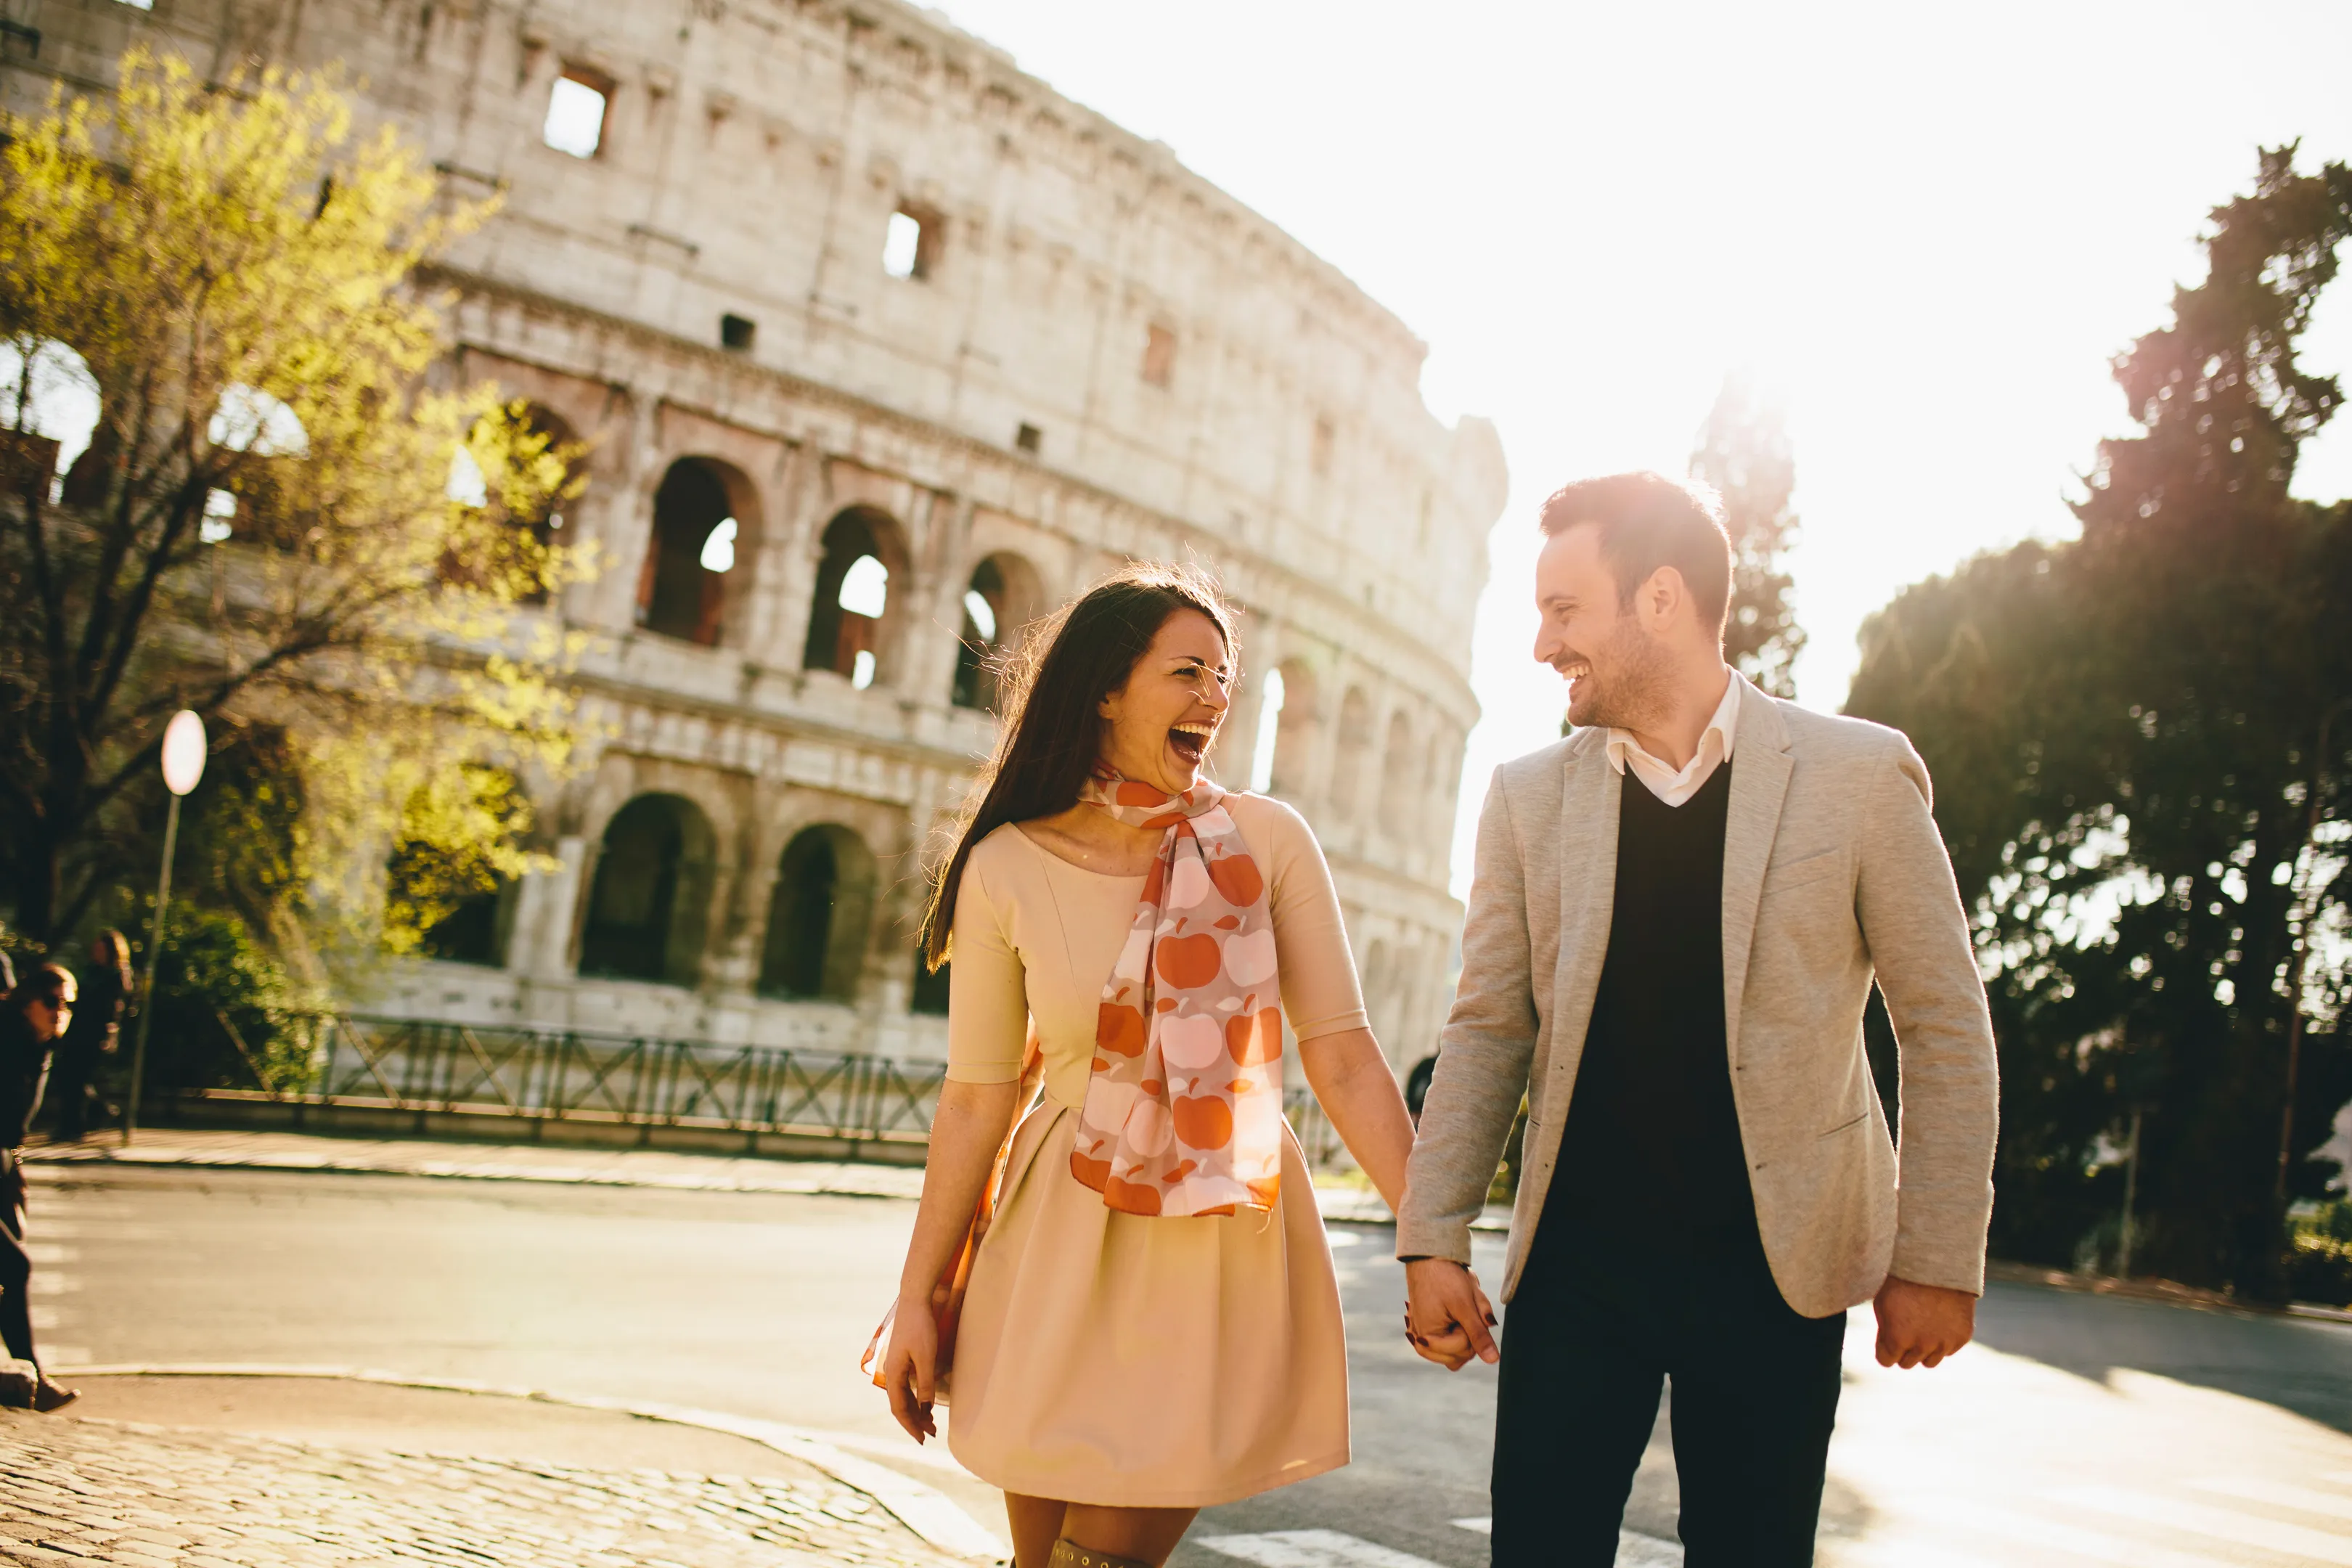 Capture your memories with a photoshoot in Rome